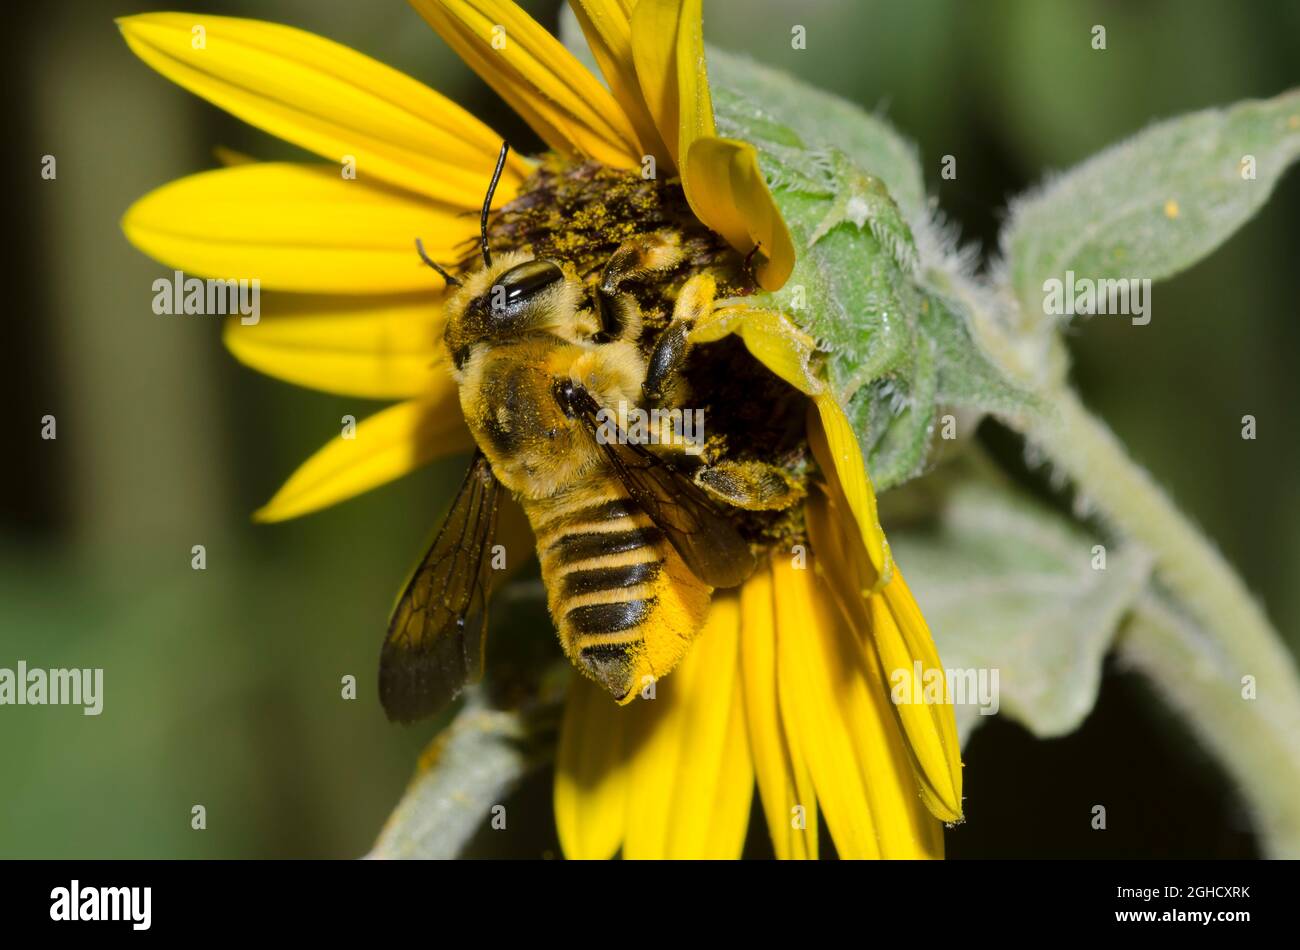 Leaf-cutter Bee, Megachile sp., foraging on Common Sunflower, Helianthus annuus Stock Photo